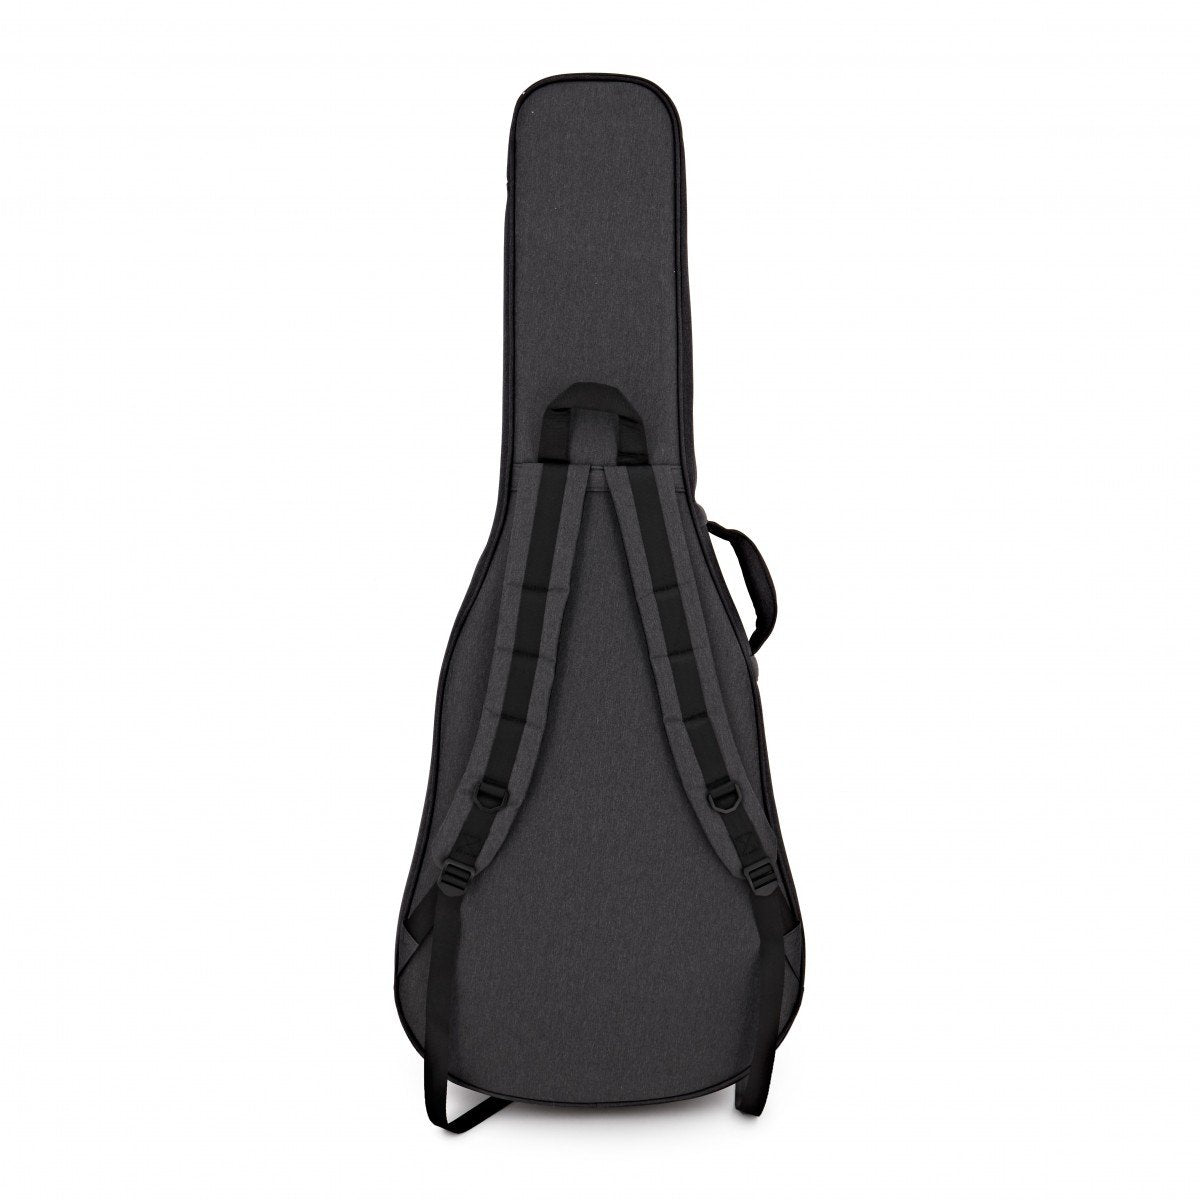 Martin 12BTG LX Series Gig Bag Gold Embroidery ( for LX1E, LXM, LX1, LXME  or Ed Sheeran